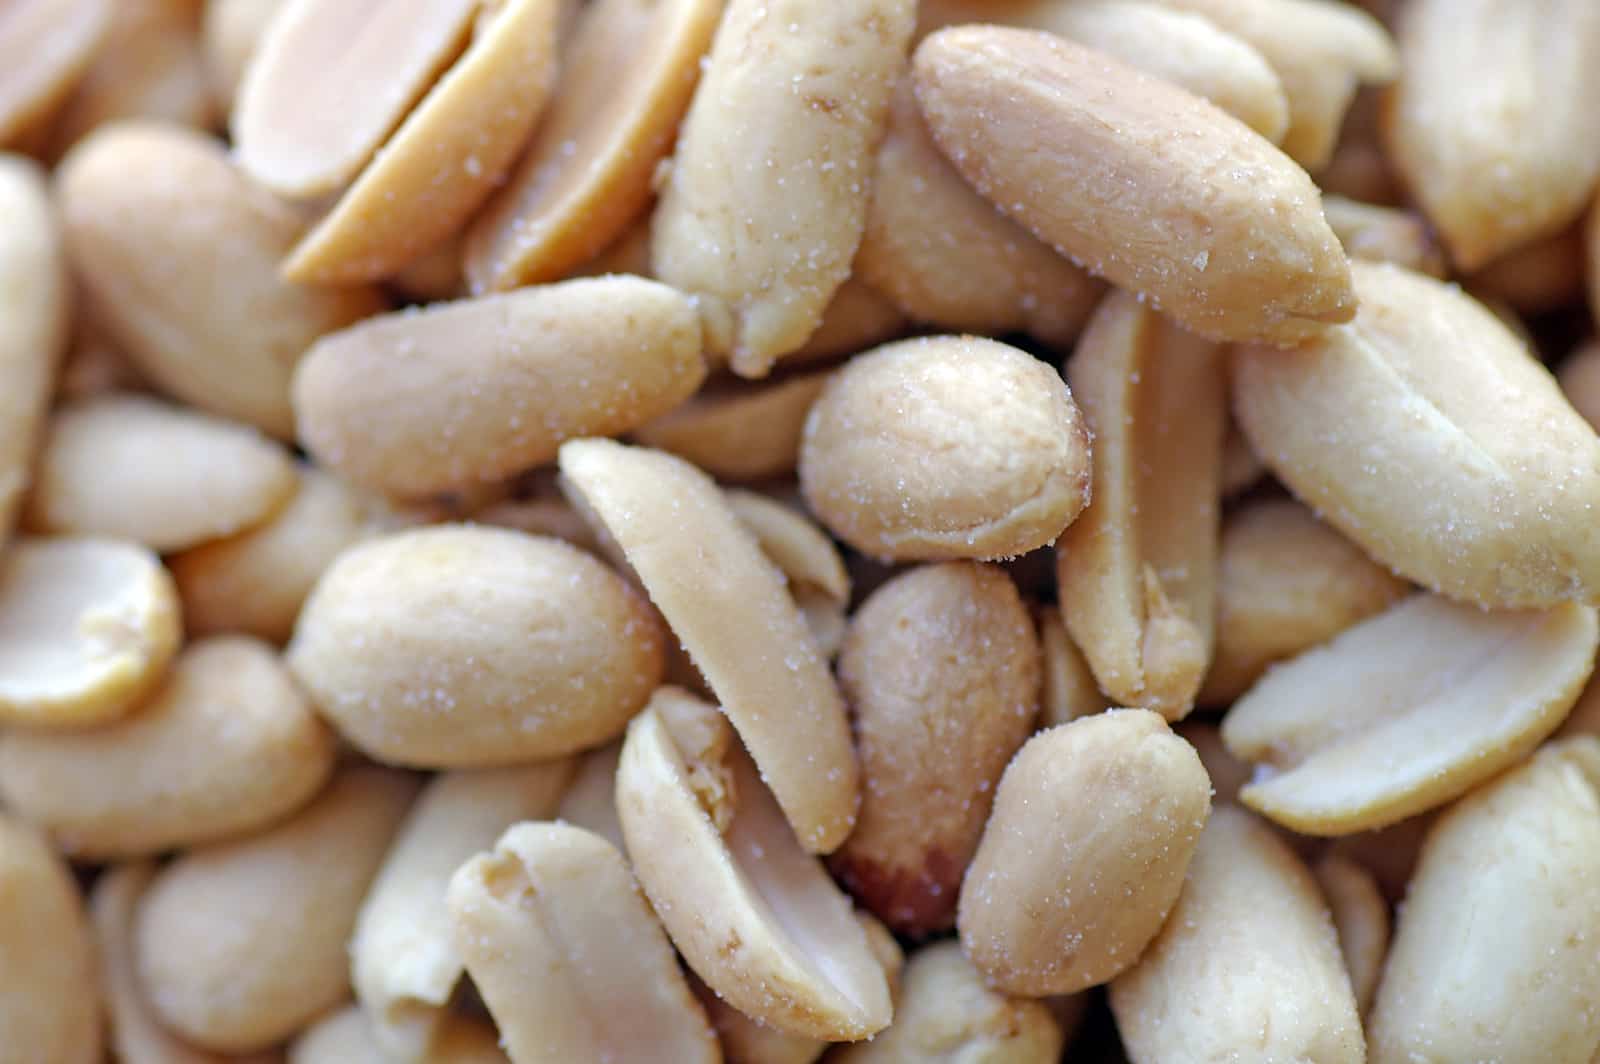 roasted shelled and salted peanuts